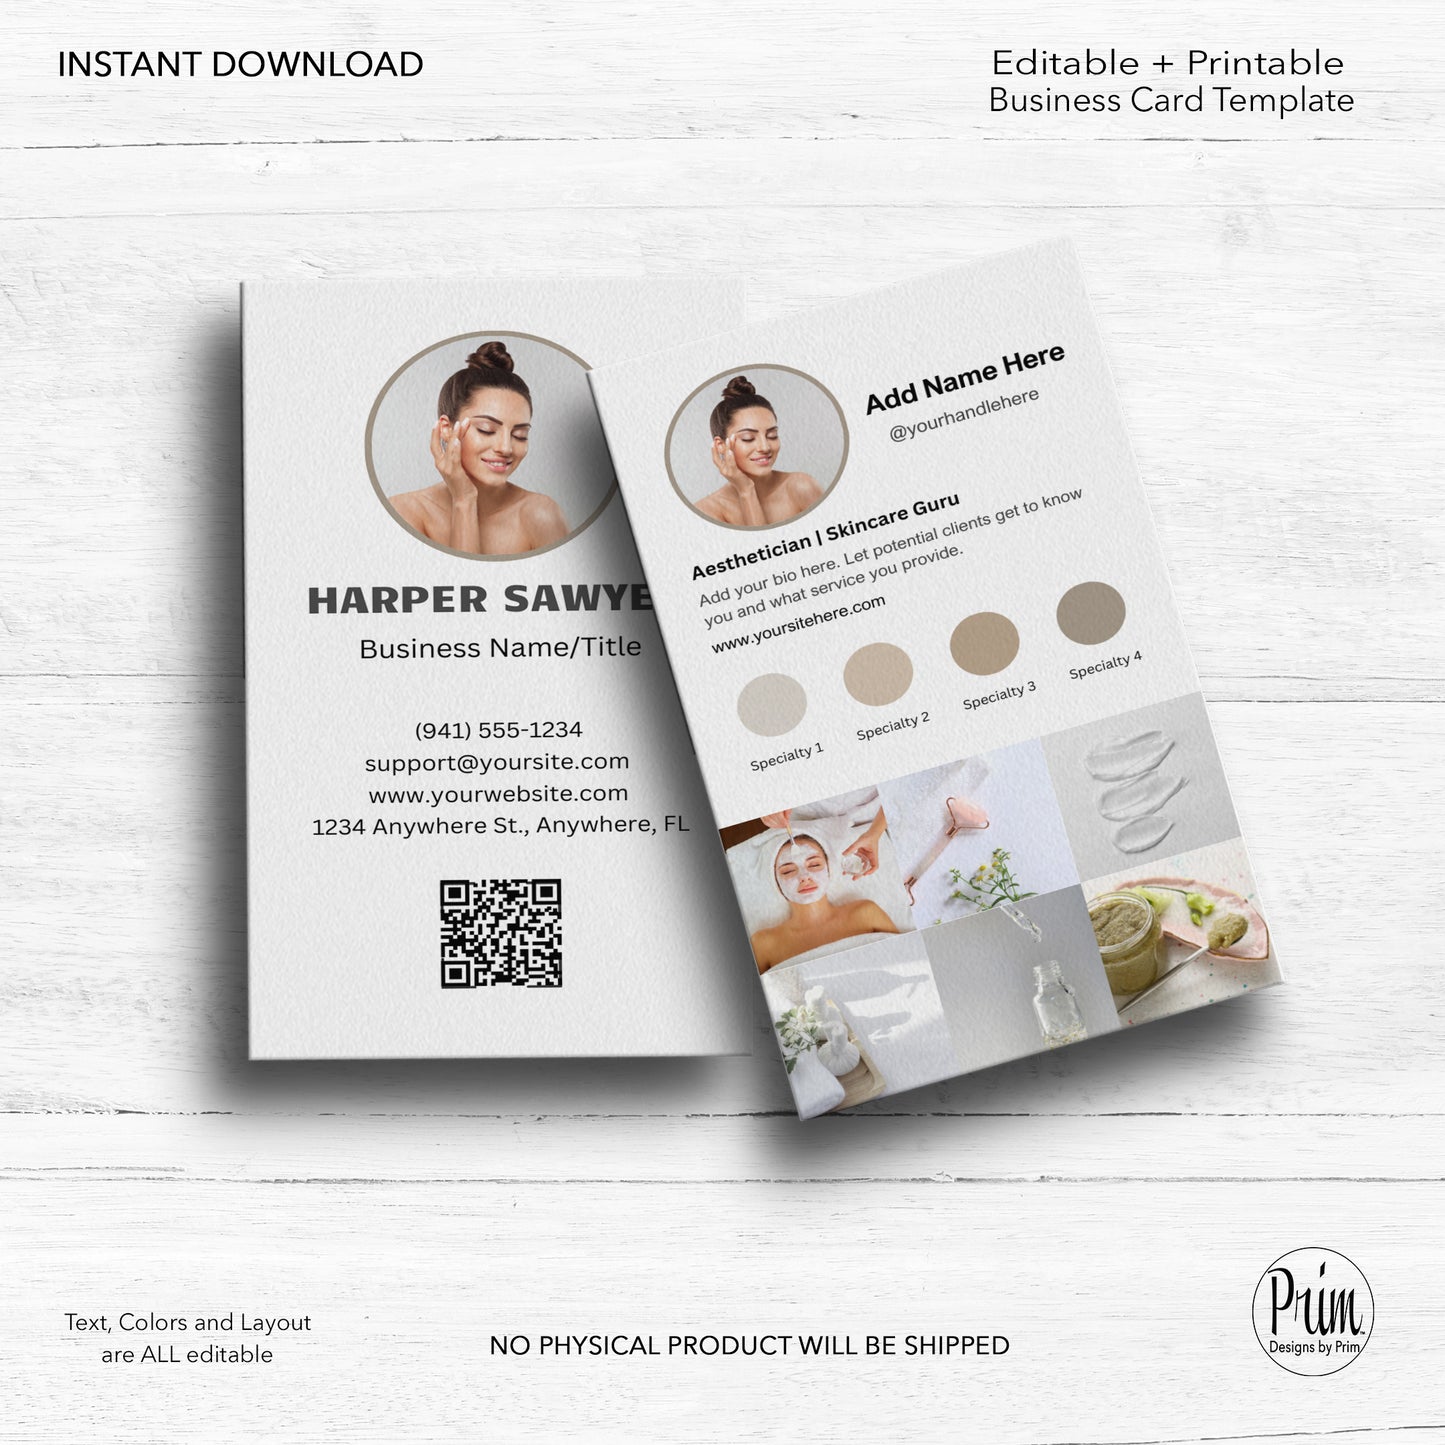 Designs by Prim Instagram Business Card | Editable Business Card Template| Health and Beauty Business Card Template | Influencer Business Card | QR Code Business Card